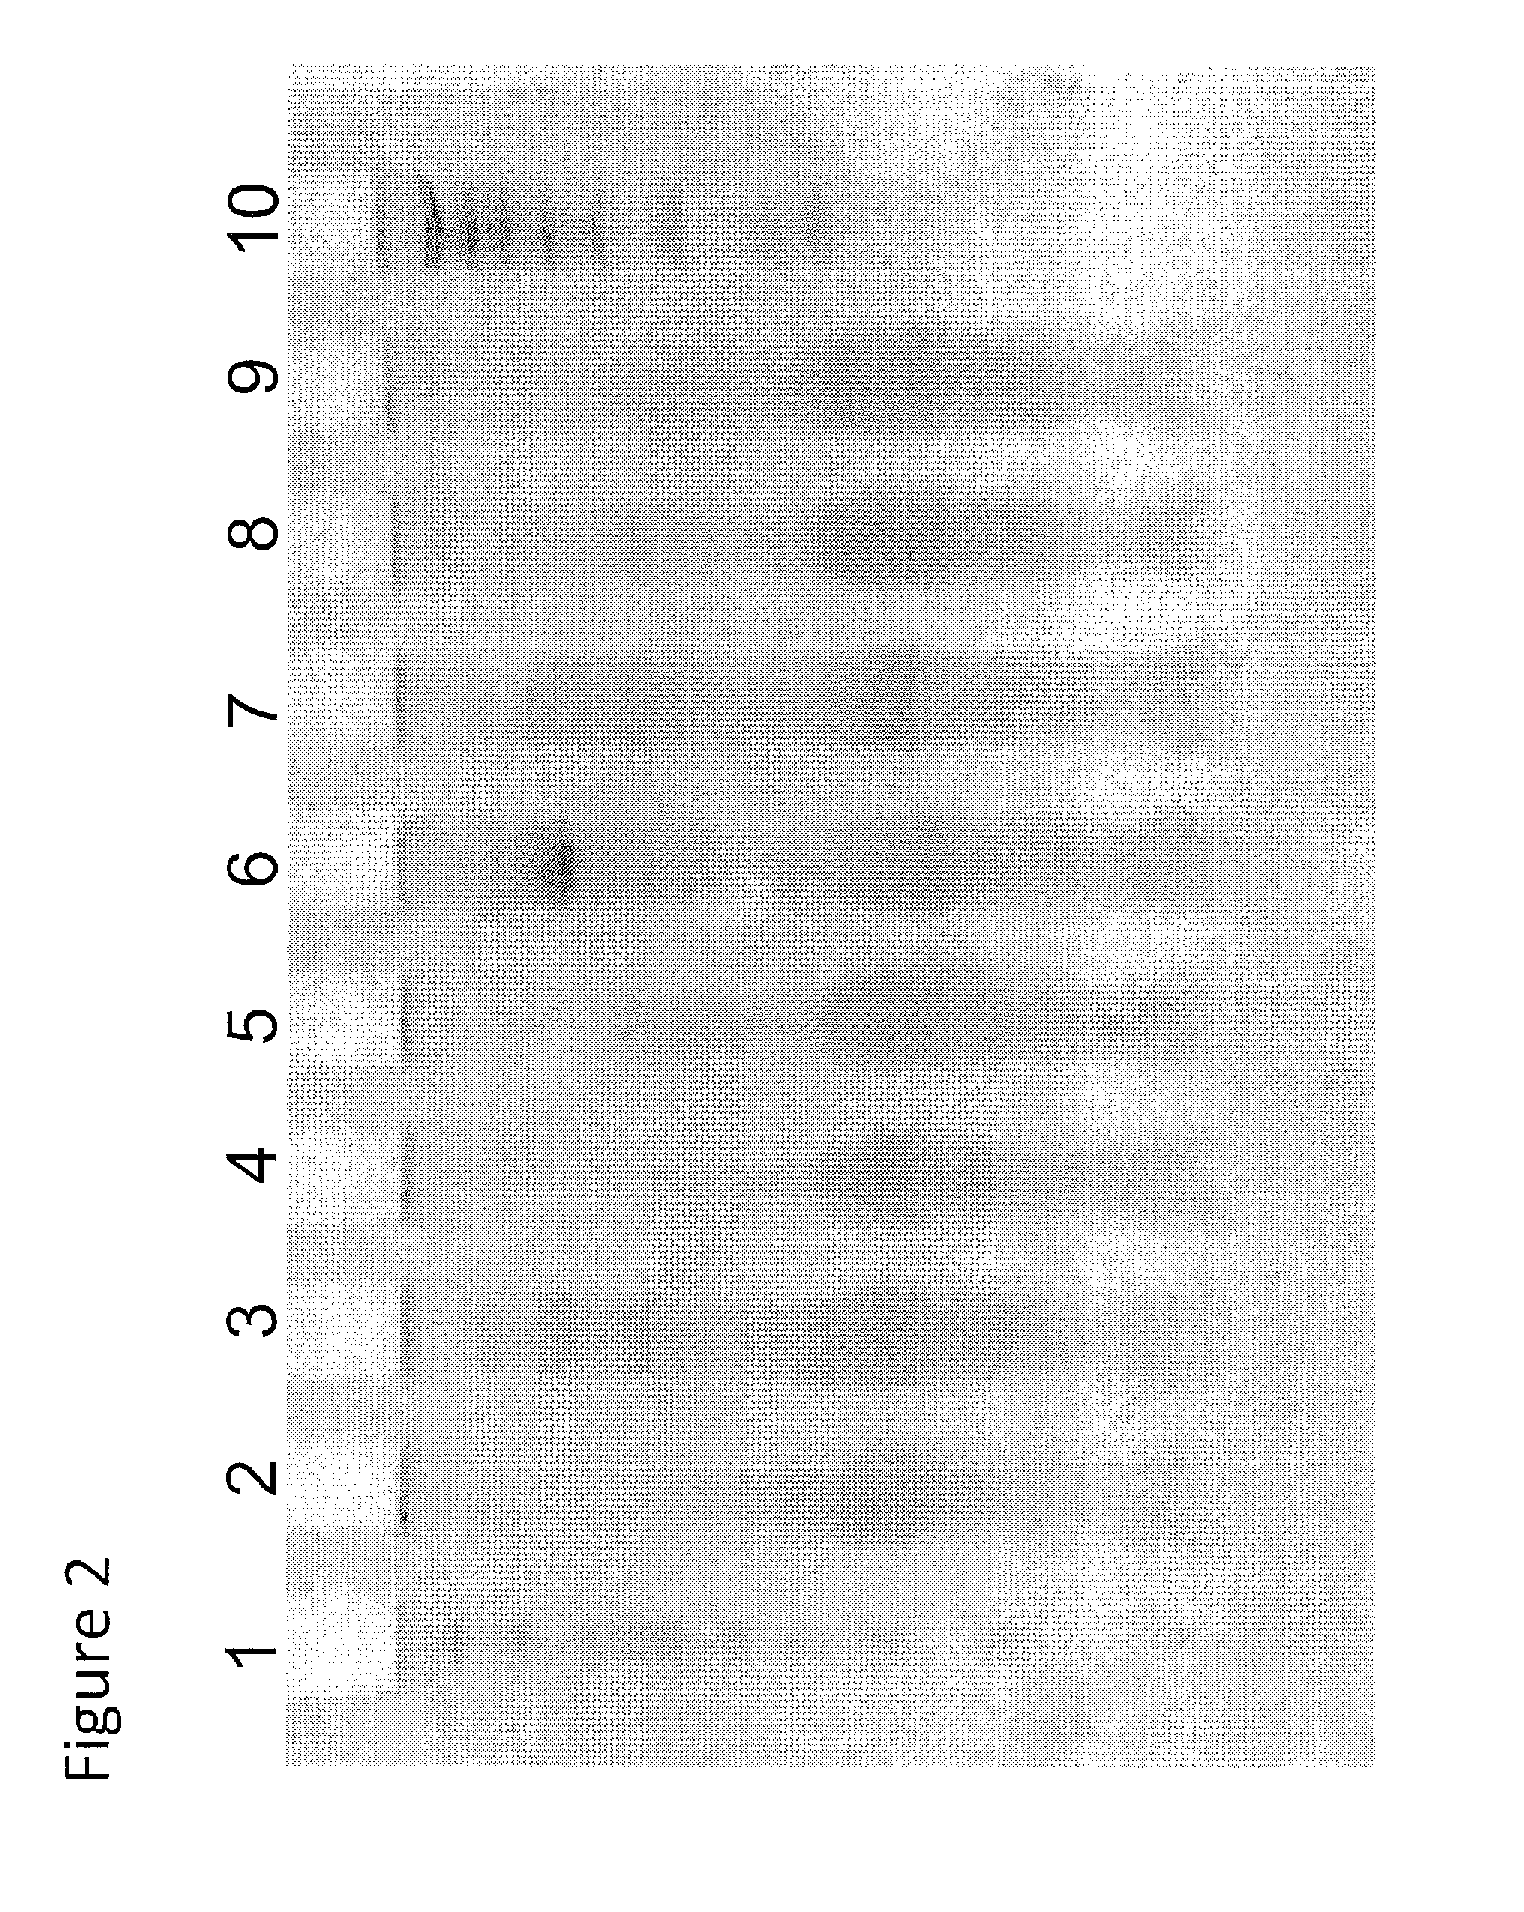 Oligonucleotide ligation, barcoding and methods and compositions for improving data quality and throughput using massively parallel sequencing